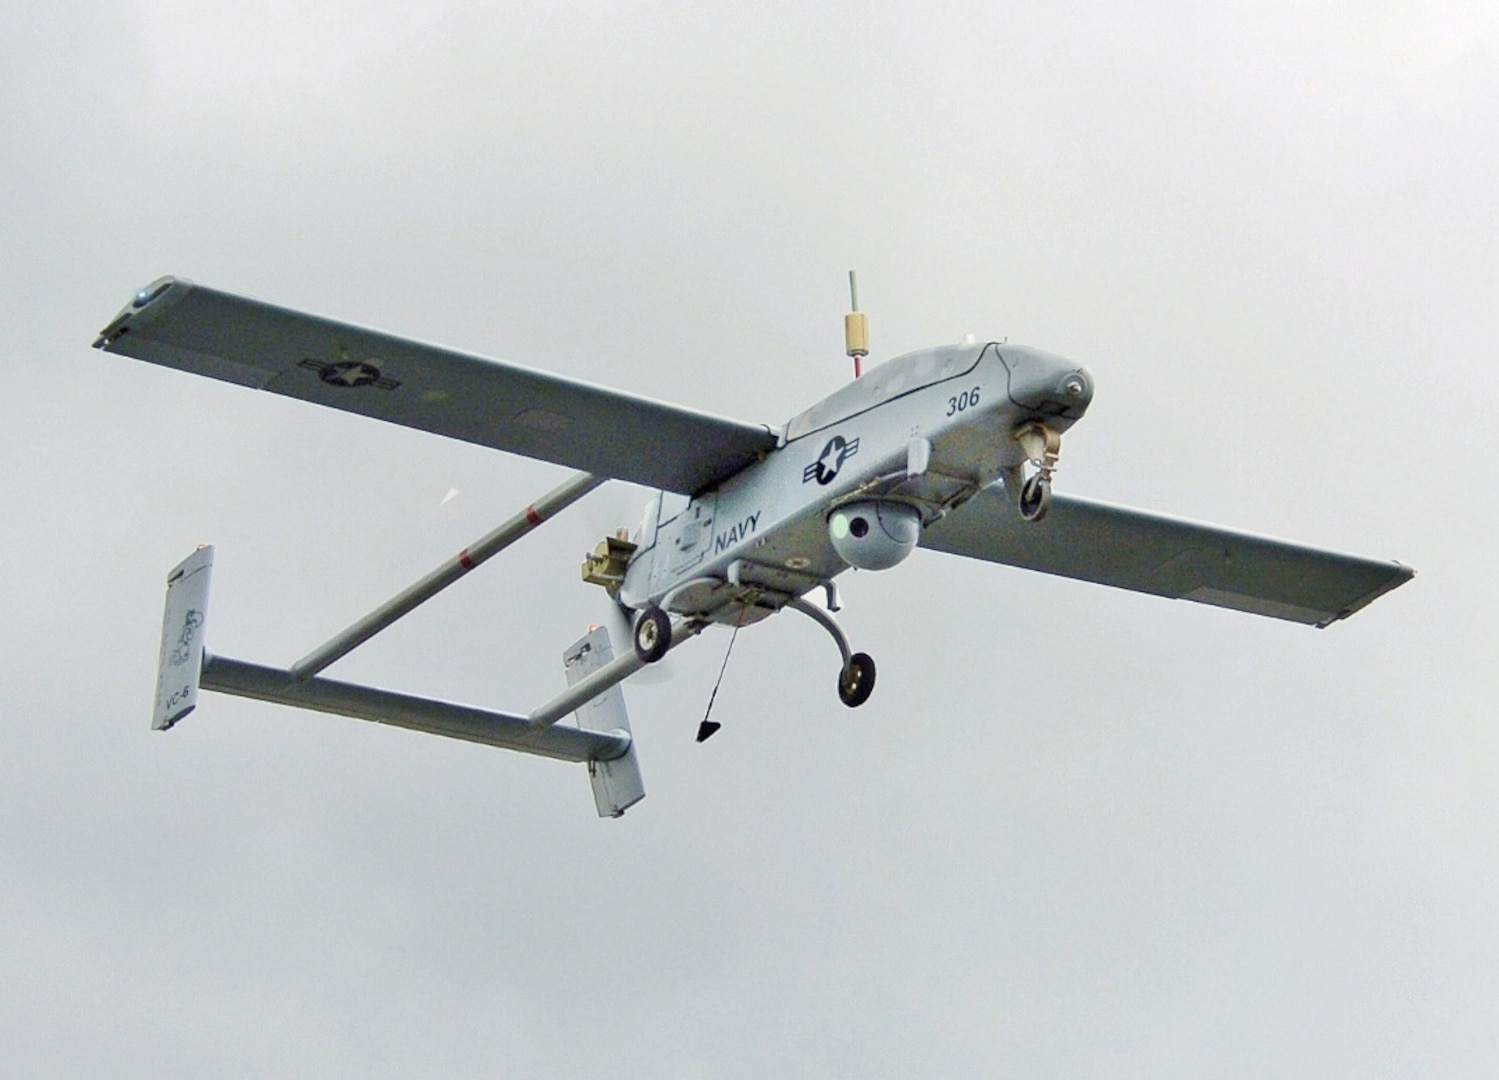 An U.S. Navy RQ-2B Pioneer Unmanned Aerial Vehicle, assigned to the VC-6) uses its sensor turret to scan at the Webster Field Annex of Naval Air Station Patuxent River, Maryland. 2005 (Photo by: Mate 2nd Class Daniel J. McLain, USN)